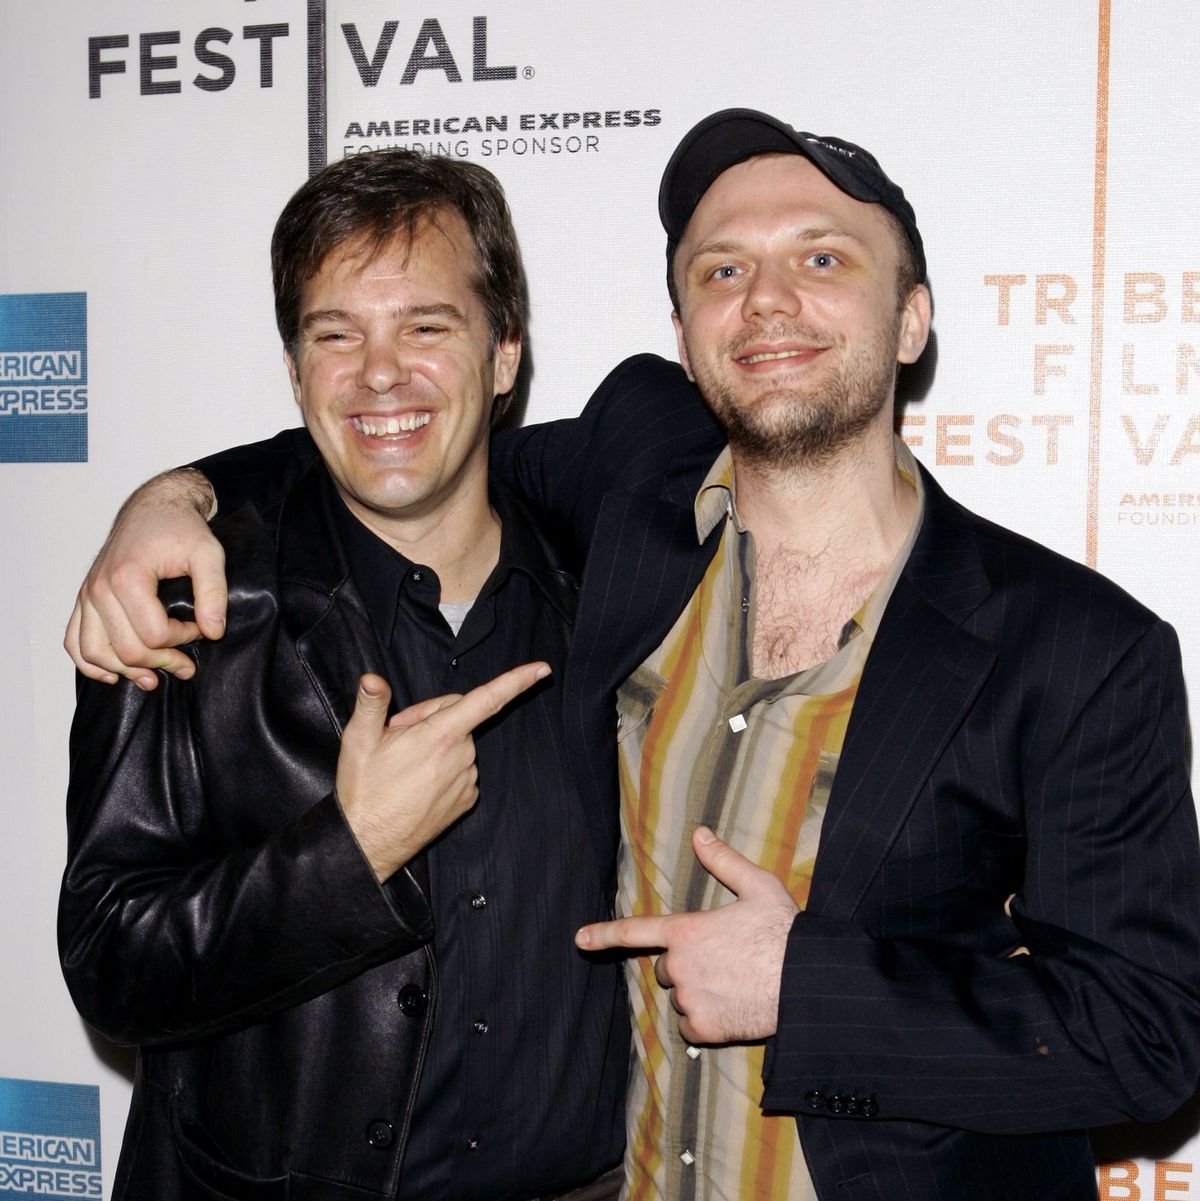 Premiere Of "The Gravedancers" At The 5th Annual TFF